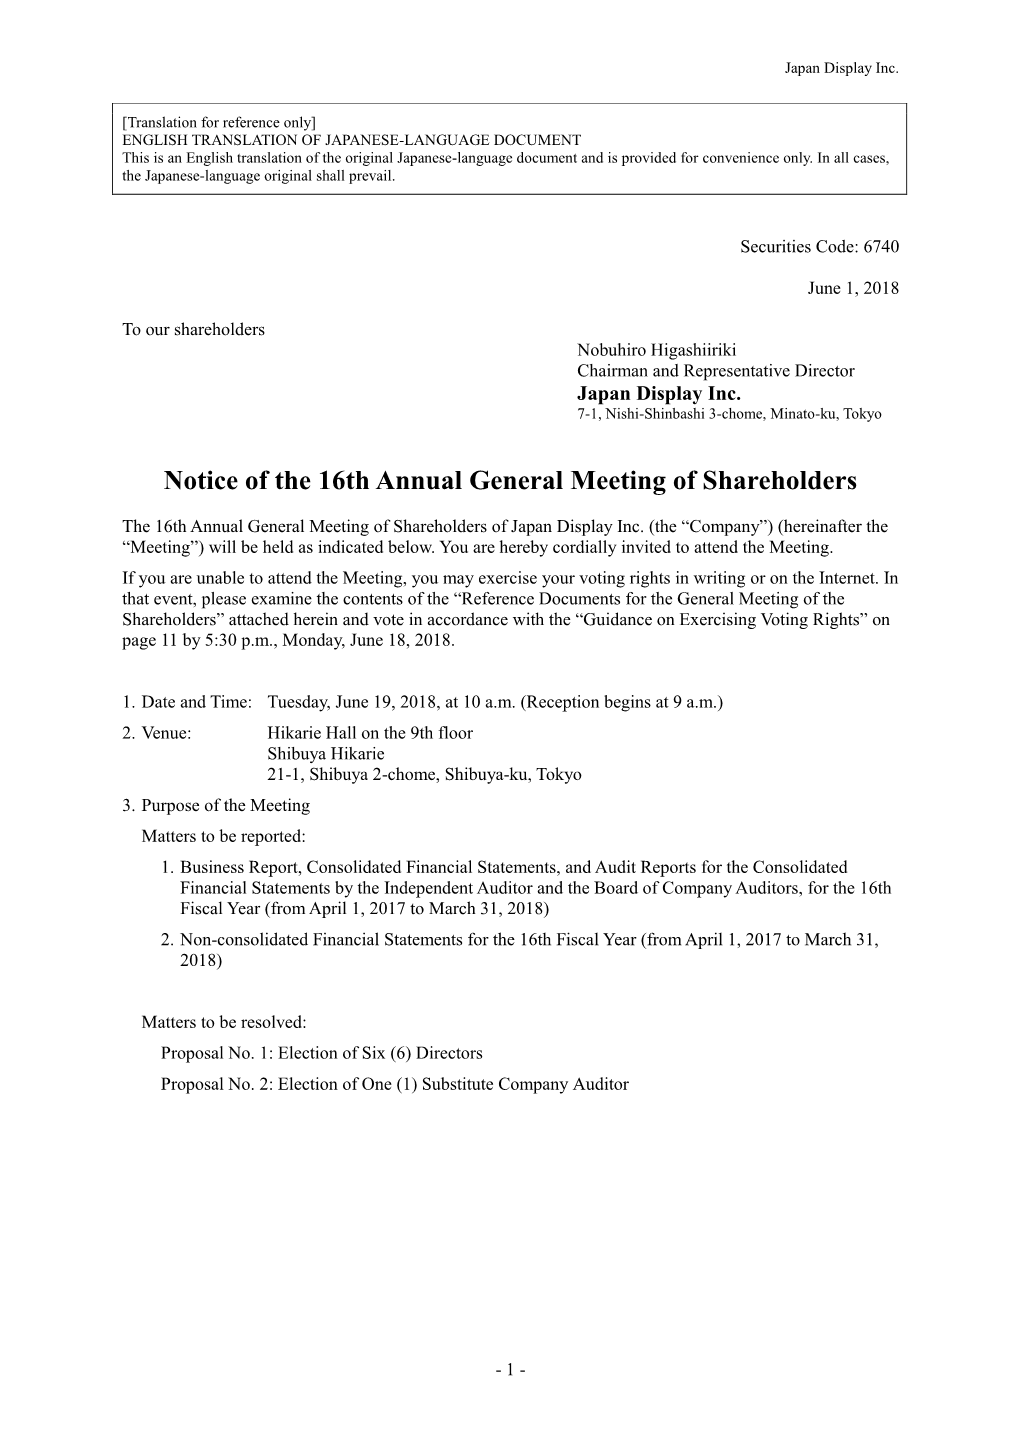 Notice of the 16Th Annual General Meeting of Shareholders